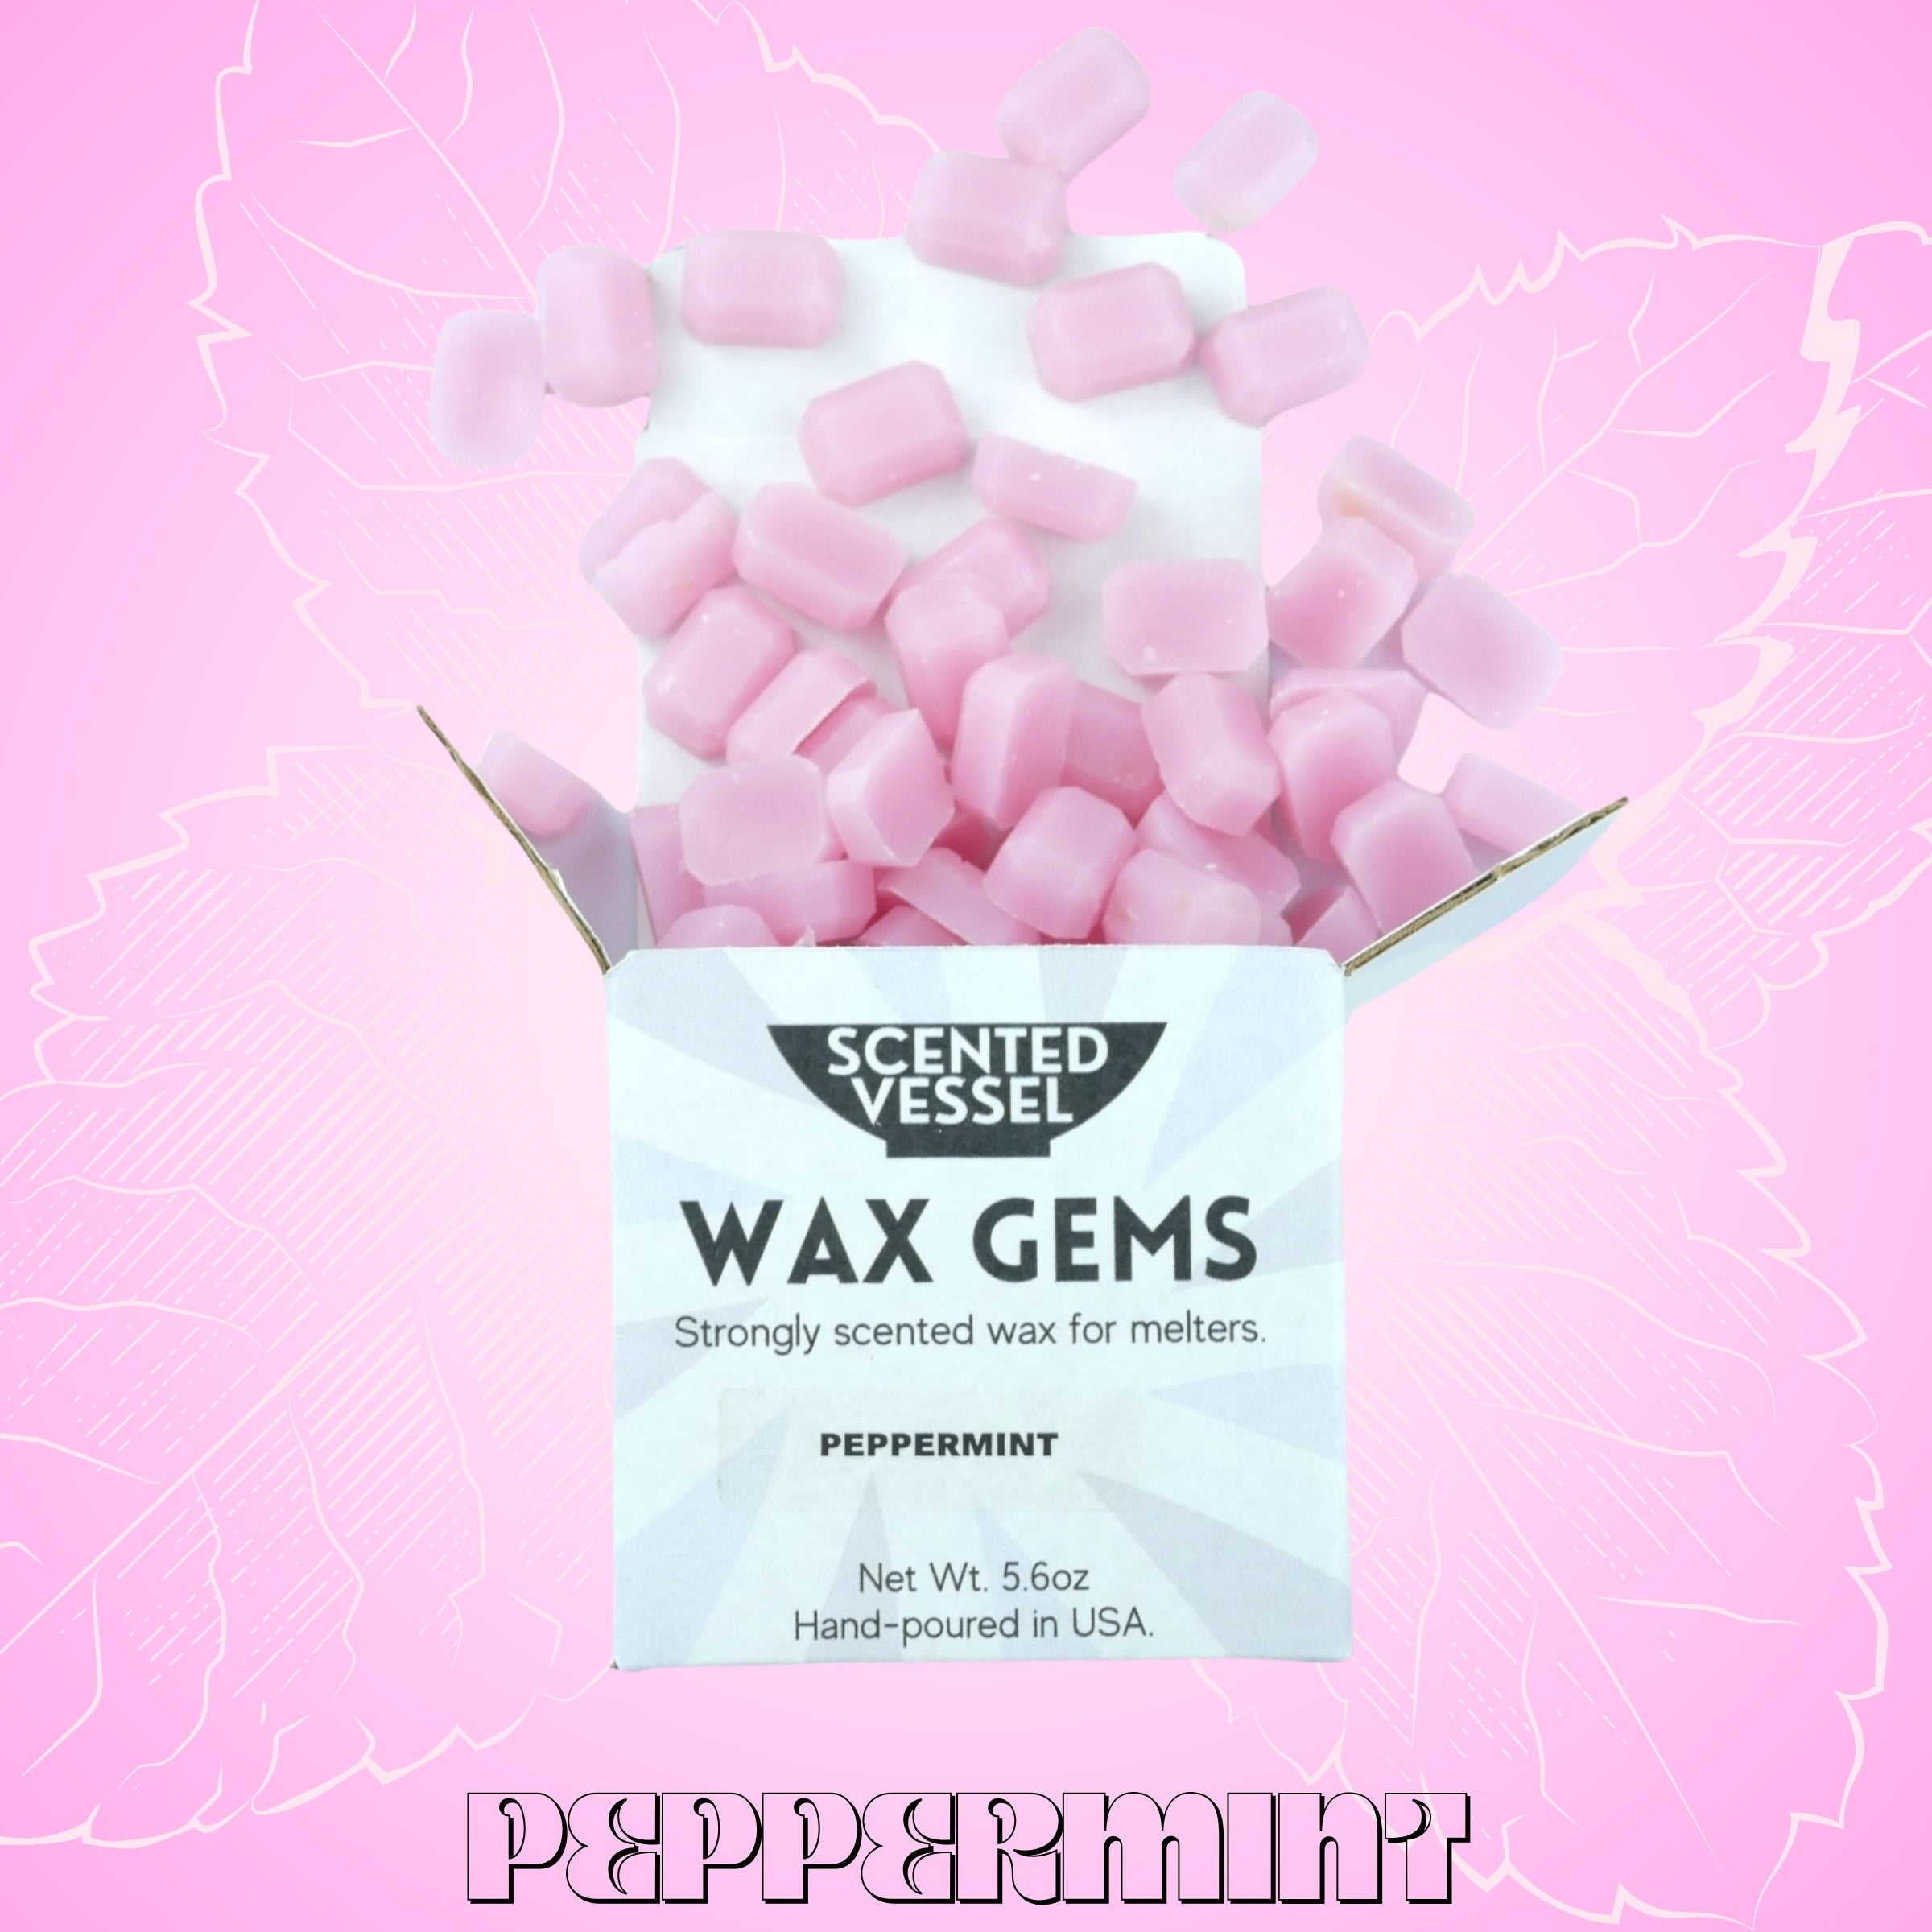 Peppermint 5.6oz Wax Gems by Scented Vessel